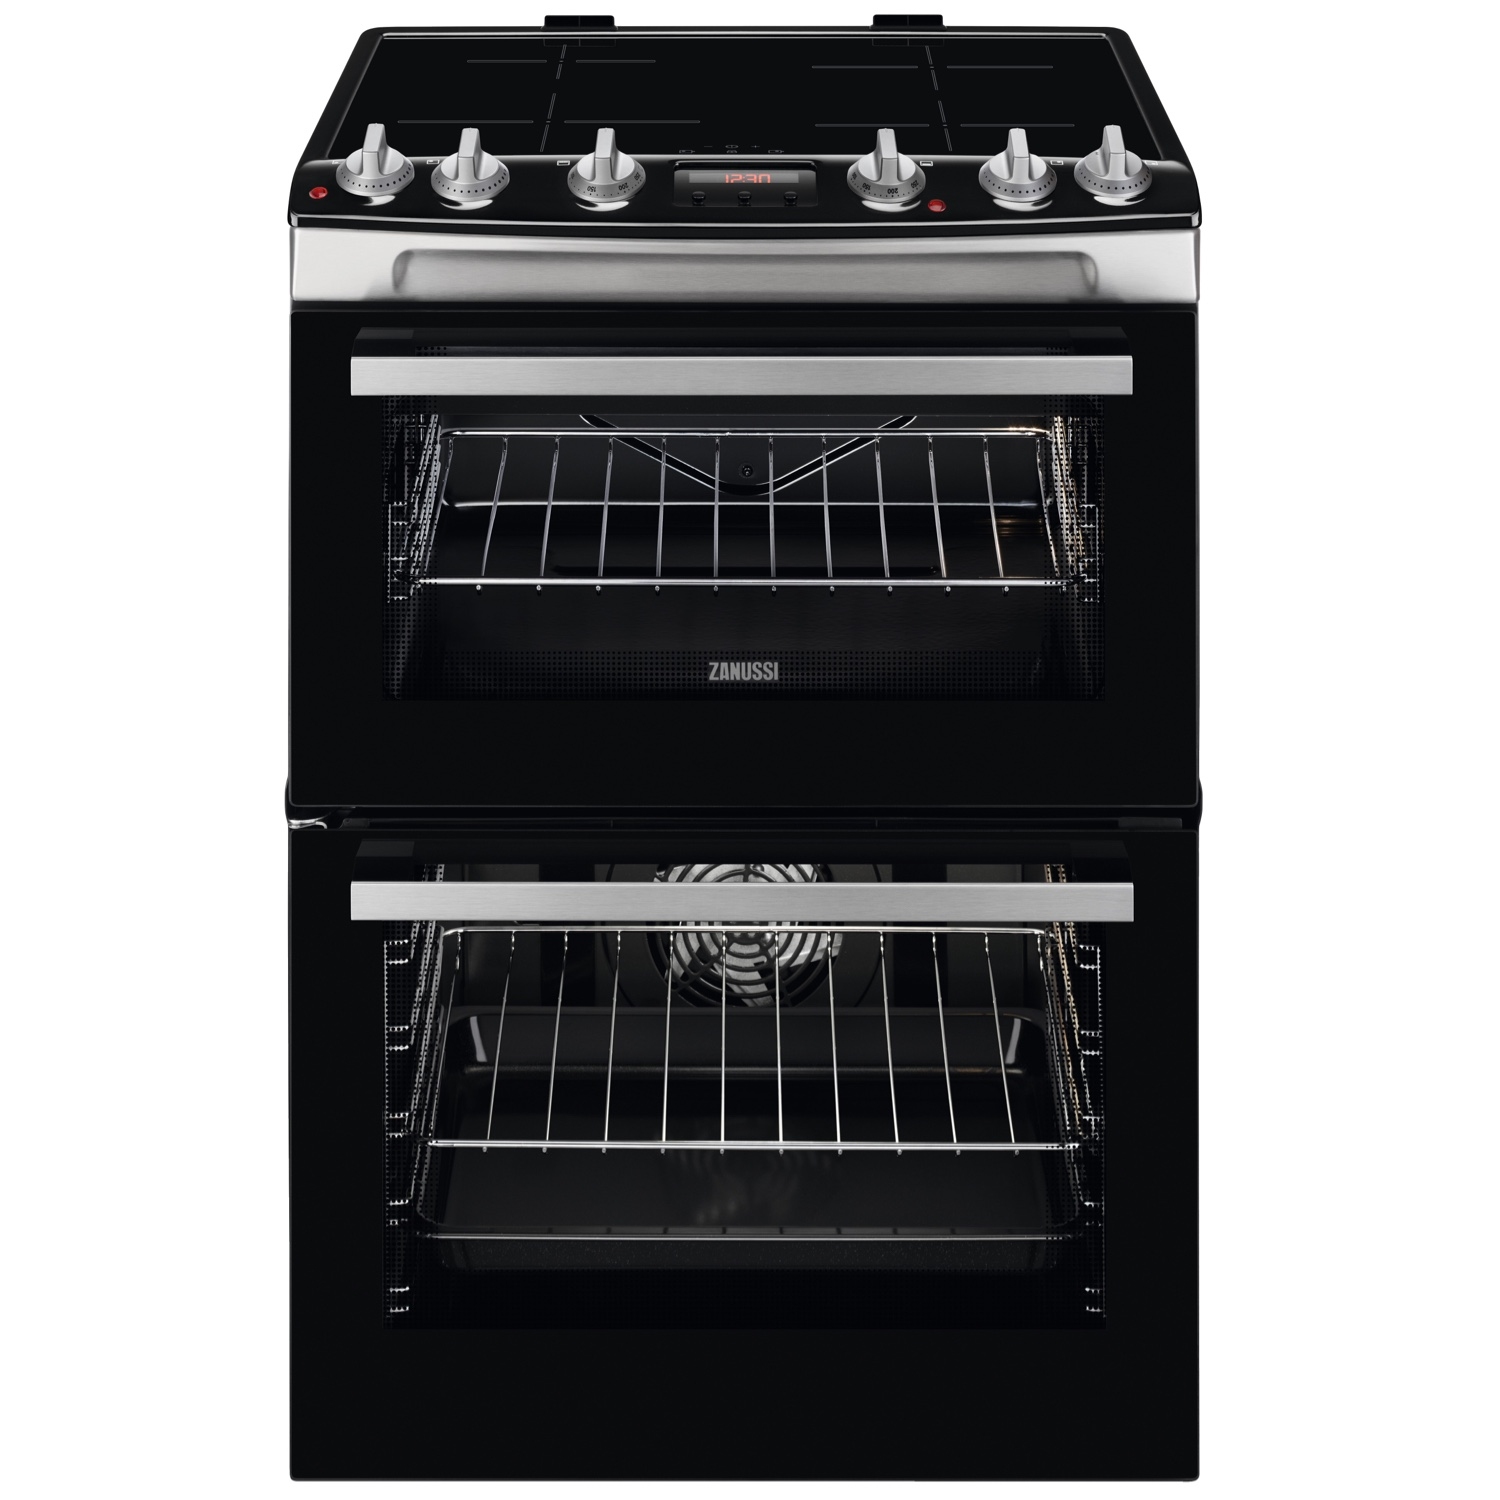 Zanussi ZCI66288XA 60cm Electric Double Oven with Induction Hob - Black and Stainless Steel - 0